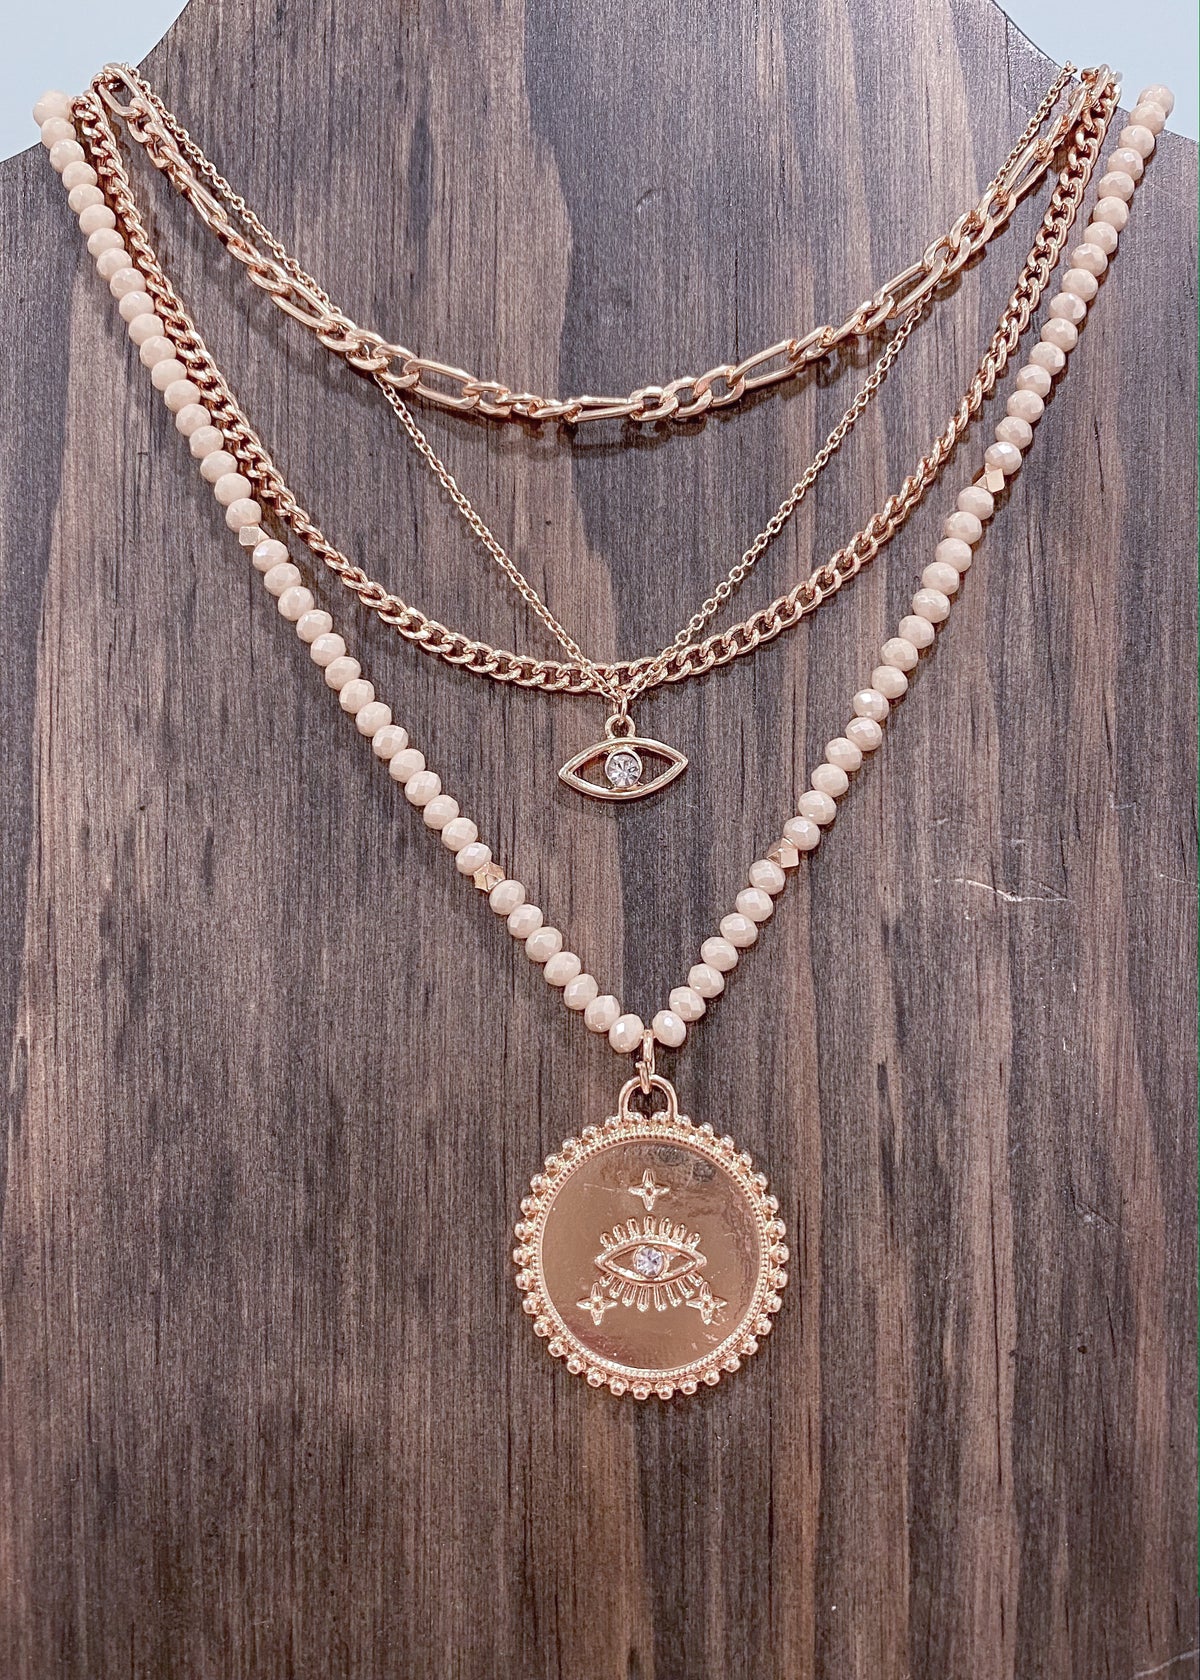 Layered Beaded Chain Necklace with Evil Eye Pendant-Cali Moon Boutique, Plainville Connecticut